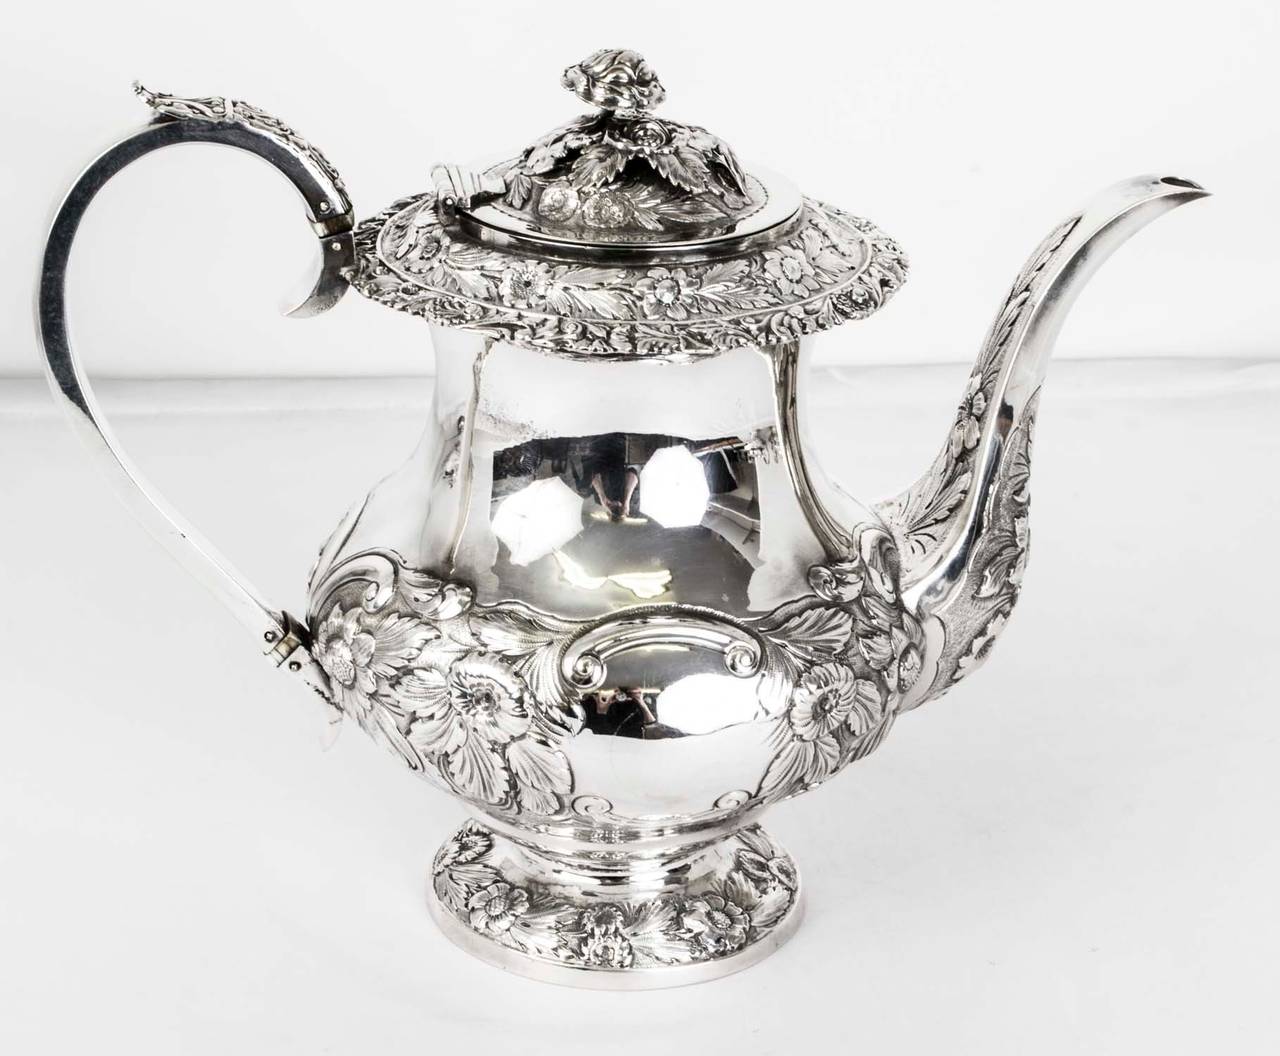 This is a beautiful antique William IV four piece sterling silver tea and coffee set with the makers mark of the celebrated silversmith Jonathan Hayne and hallmarks for London 1831. 

The whole set is beautifully embossed with floral decorations.